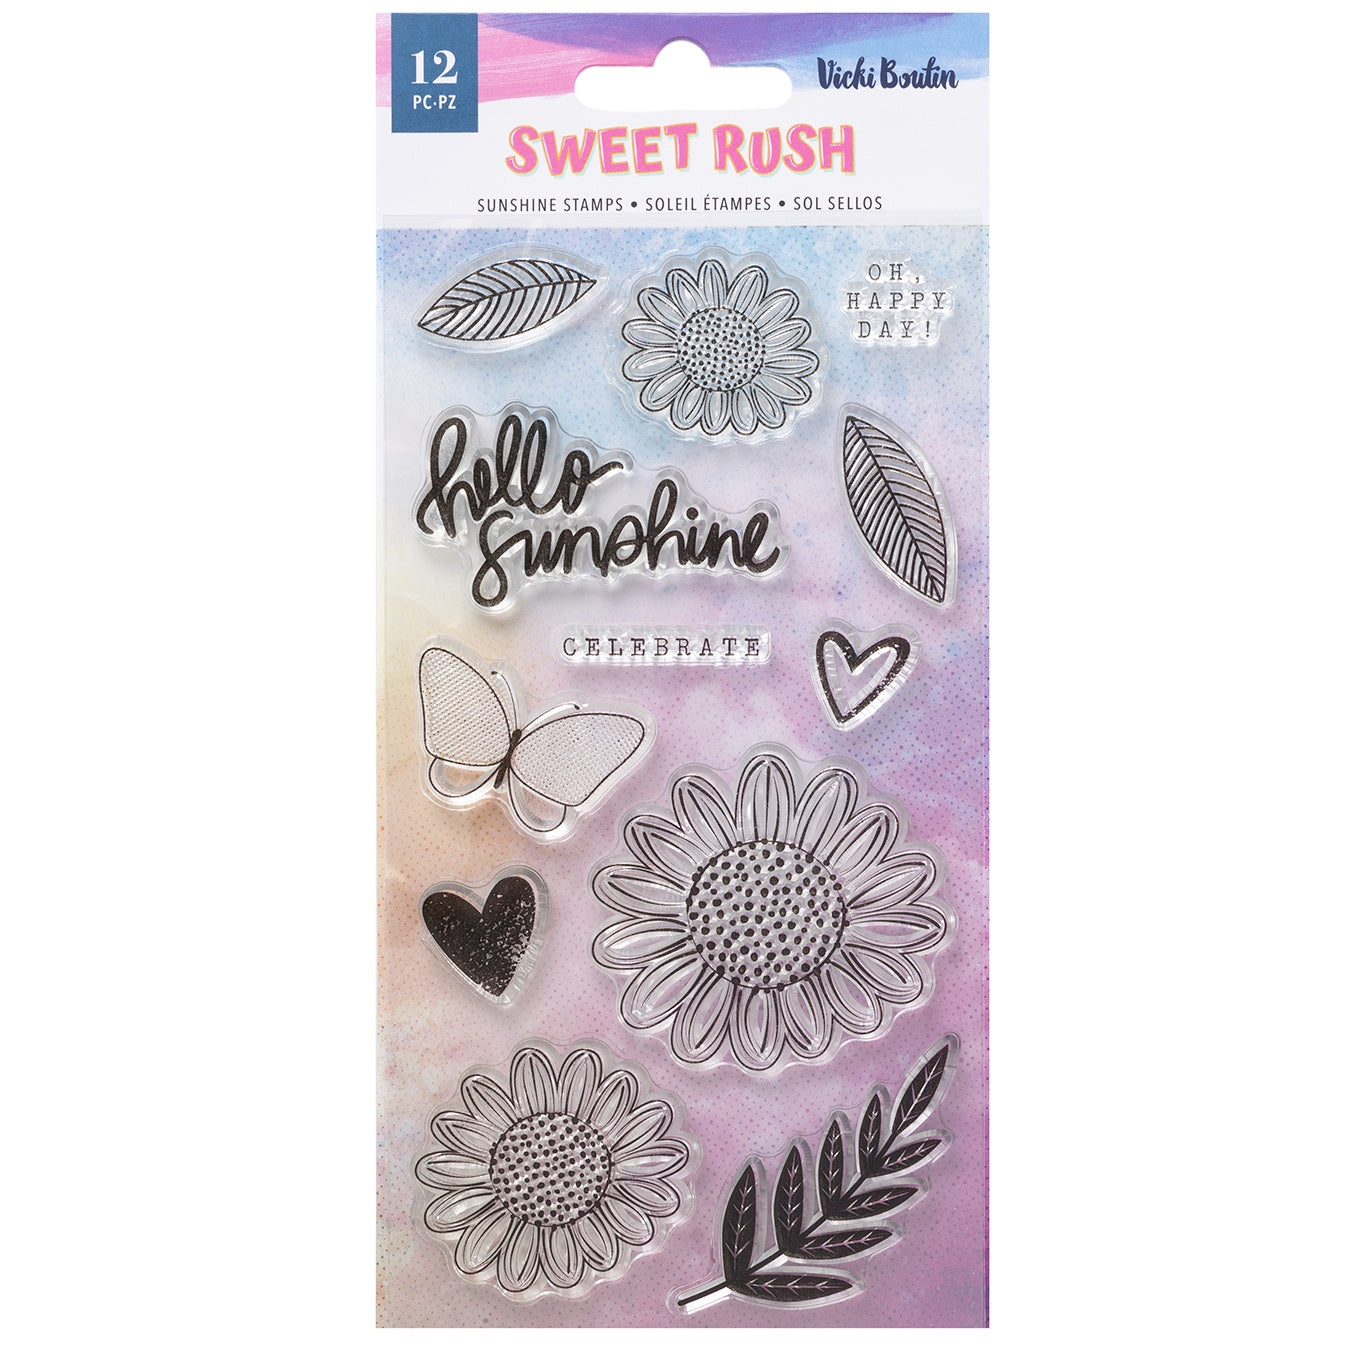 Vicki Boutin Sweet Rush Collection Clear Acrylic Stamps Sunshine